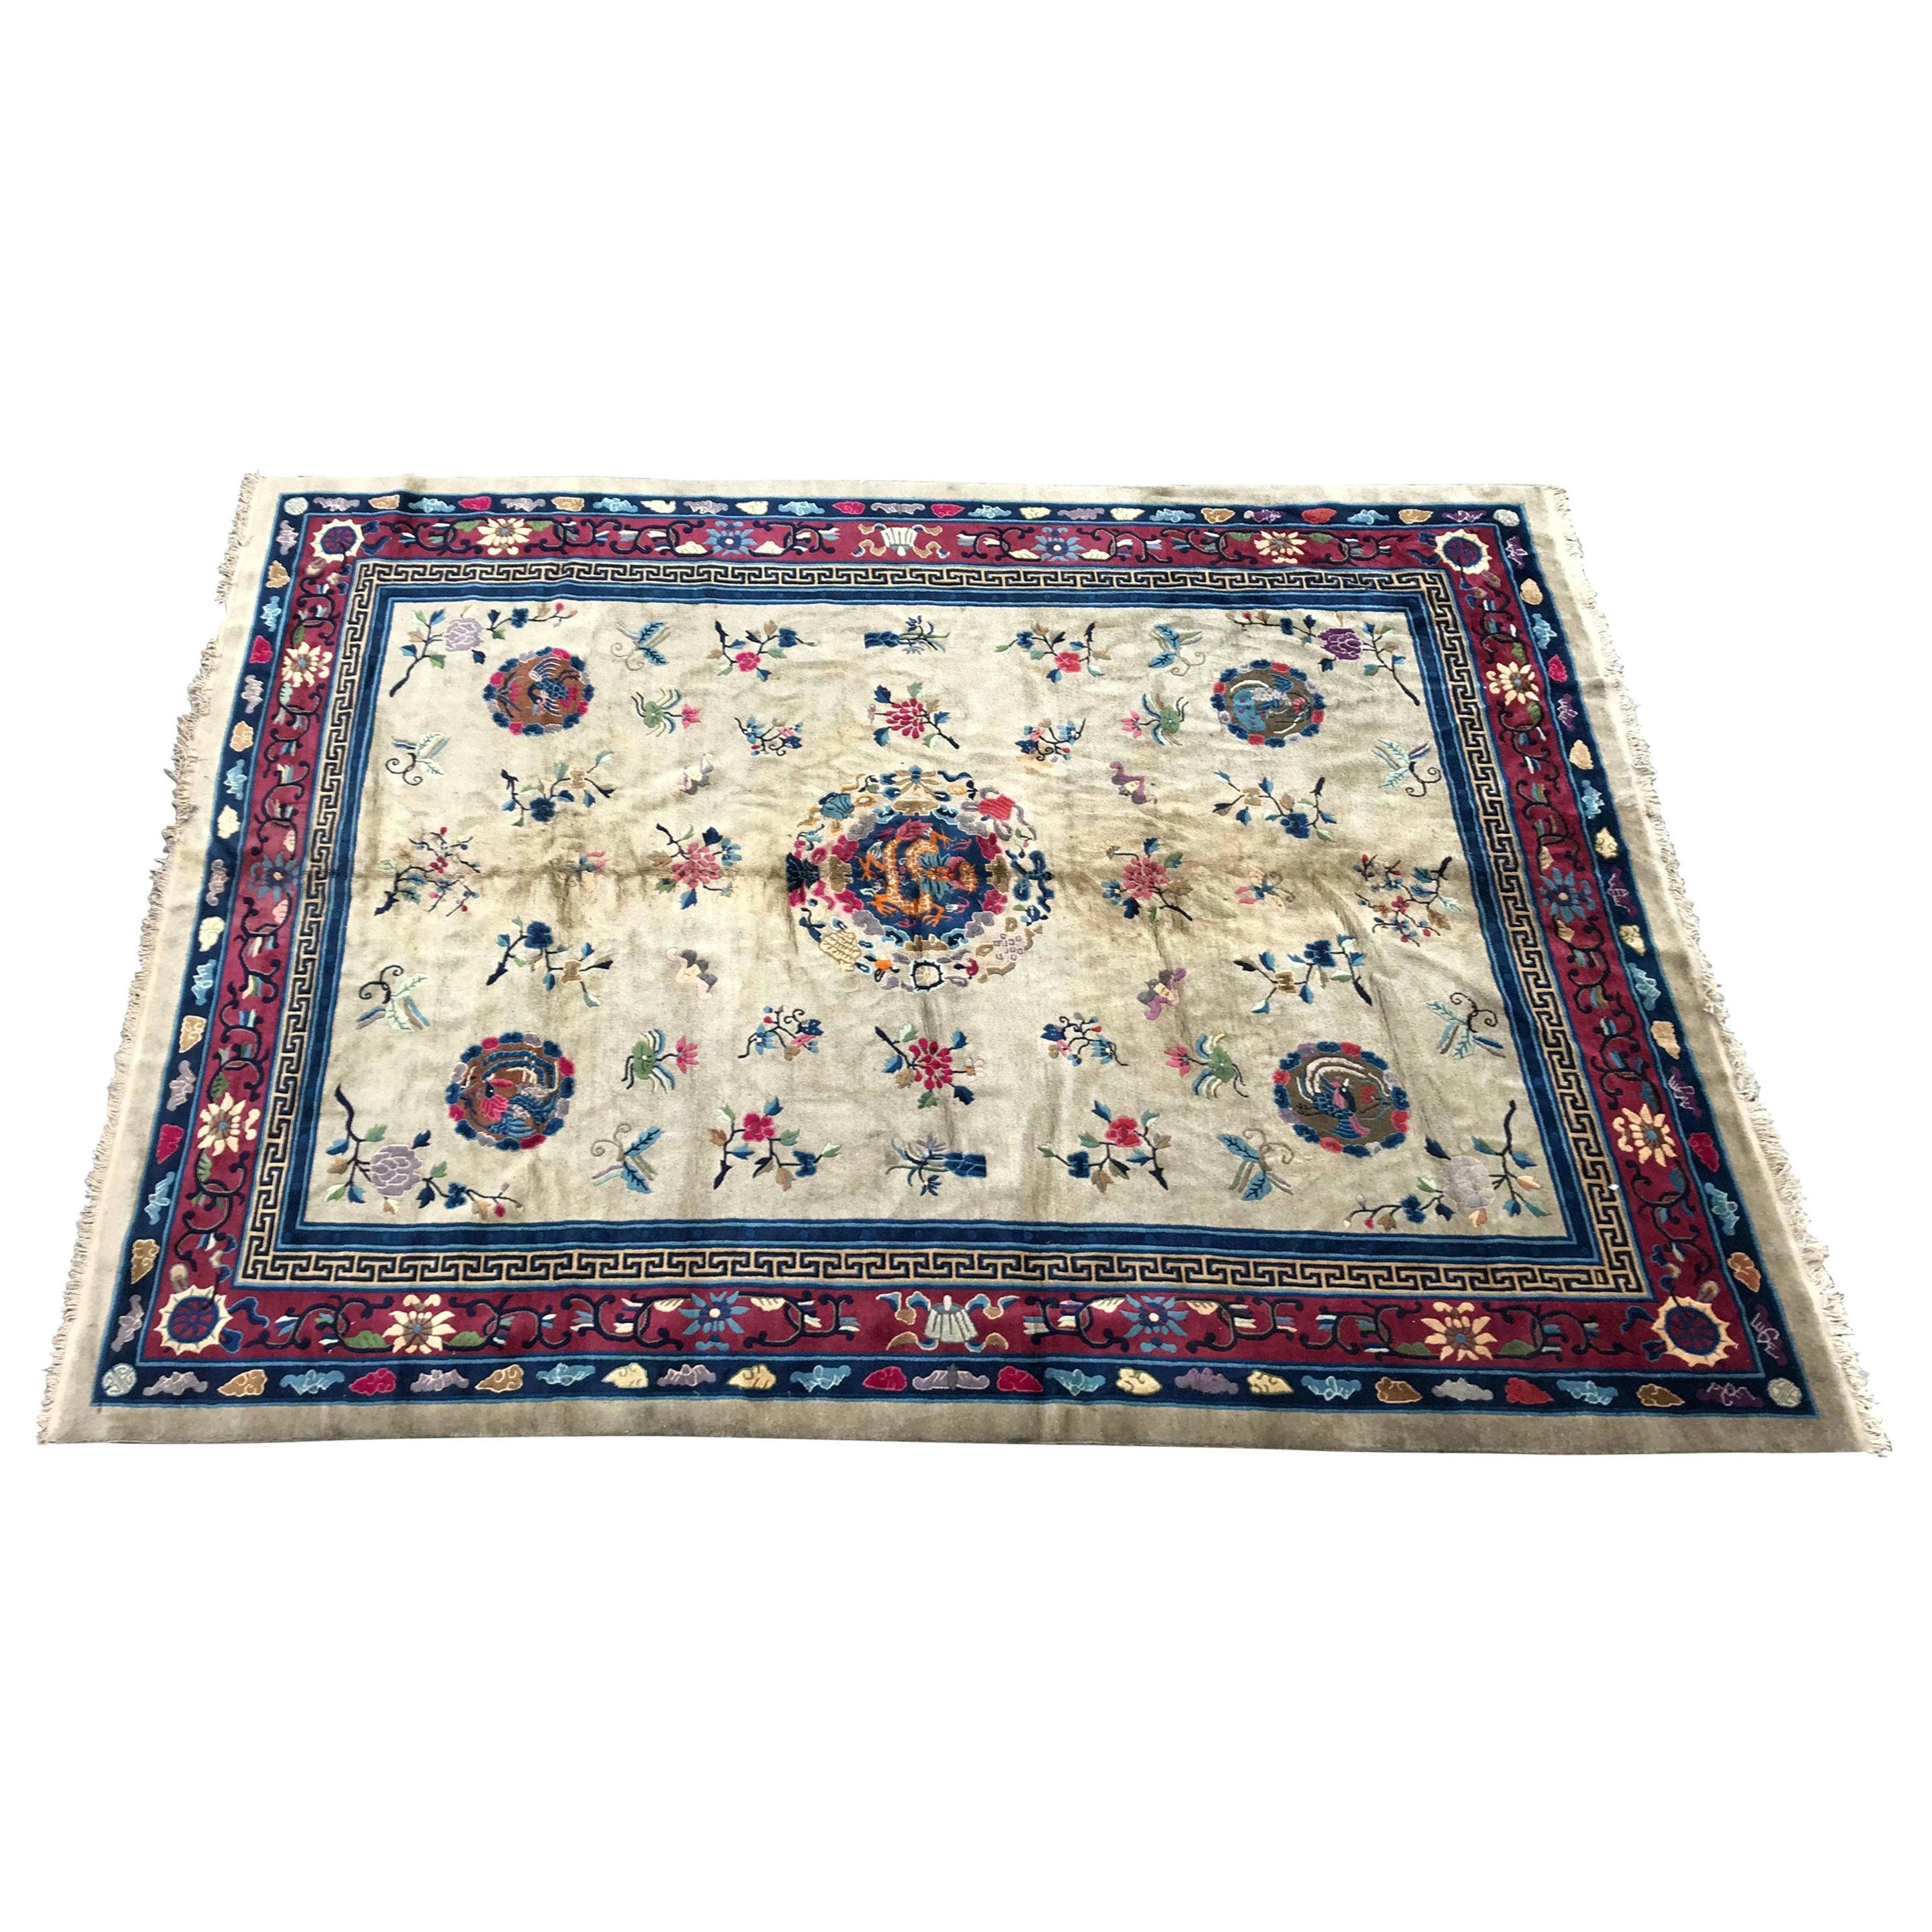 Bobyrug's Wonderful Large Antique Chinese Dragon Rug (Merveilleux grand tapis chinois ancien)